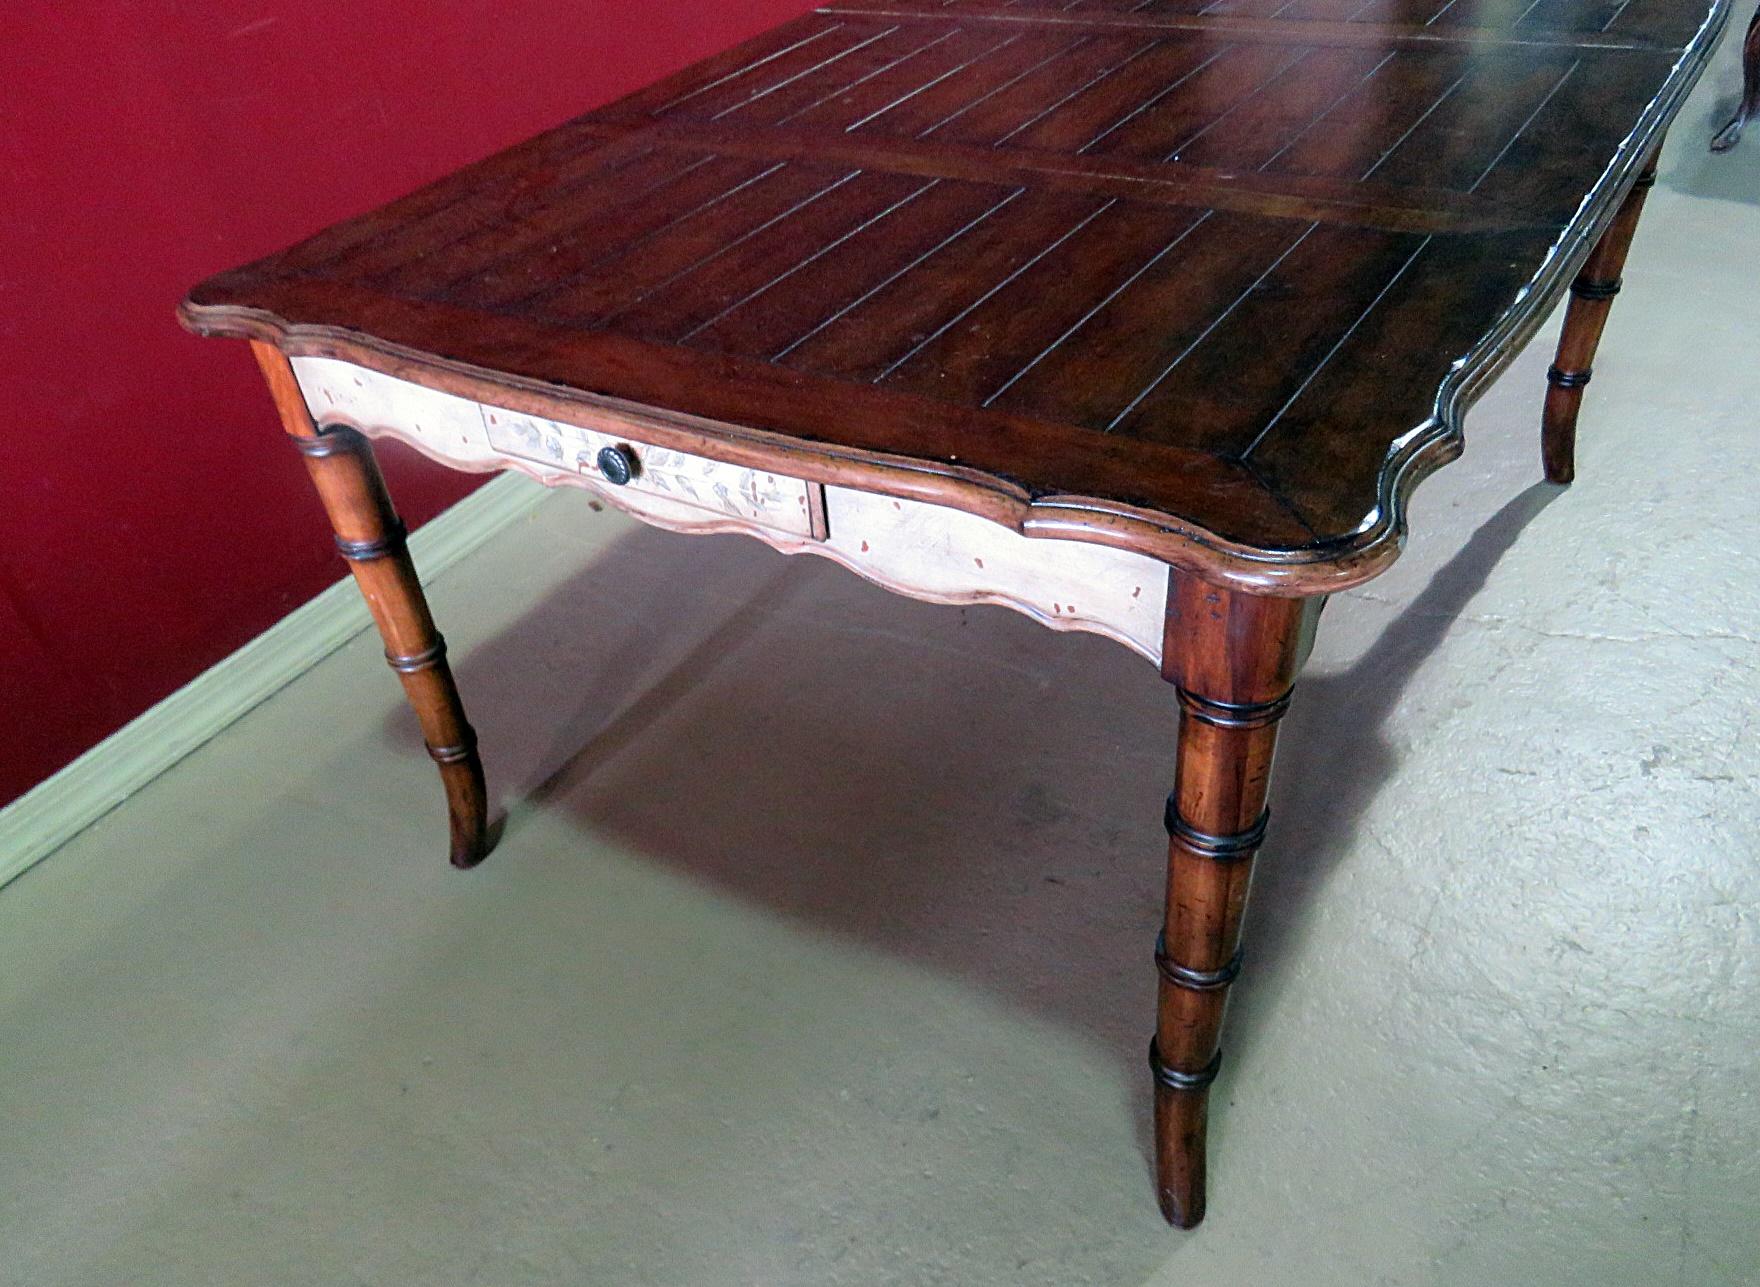 20th Century Paint Decorated French Faux Bamboo Dining Room Table with Silverware Drawers